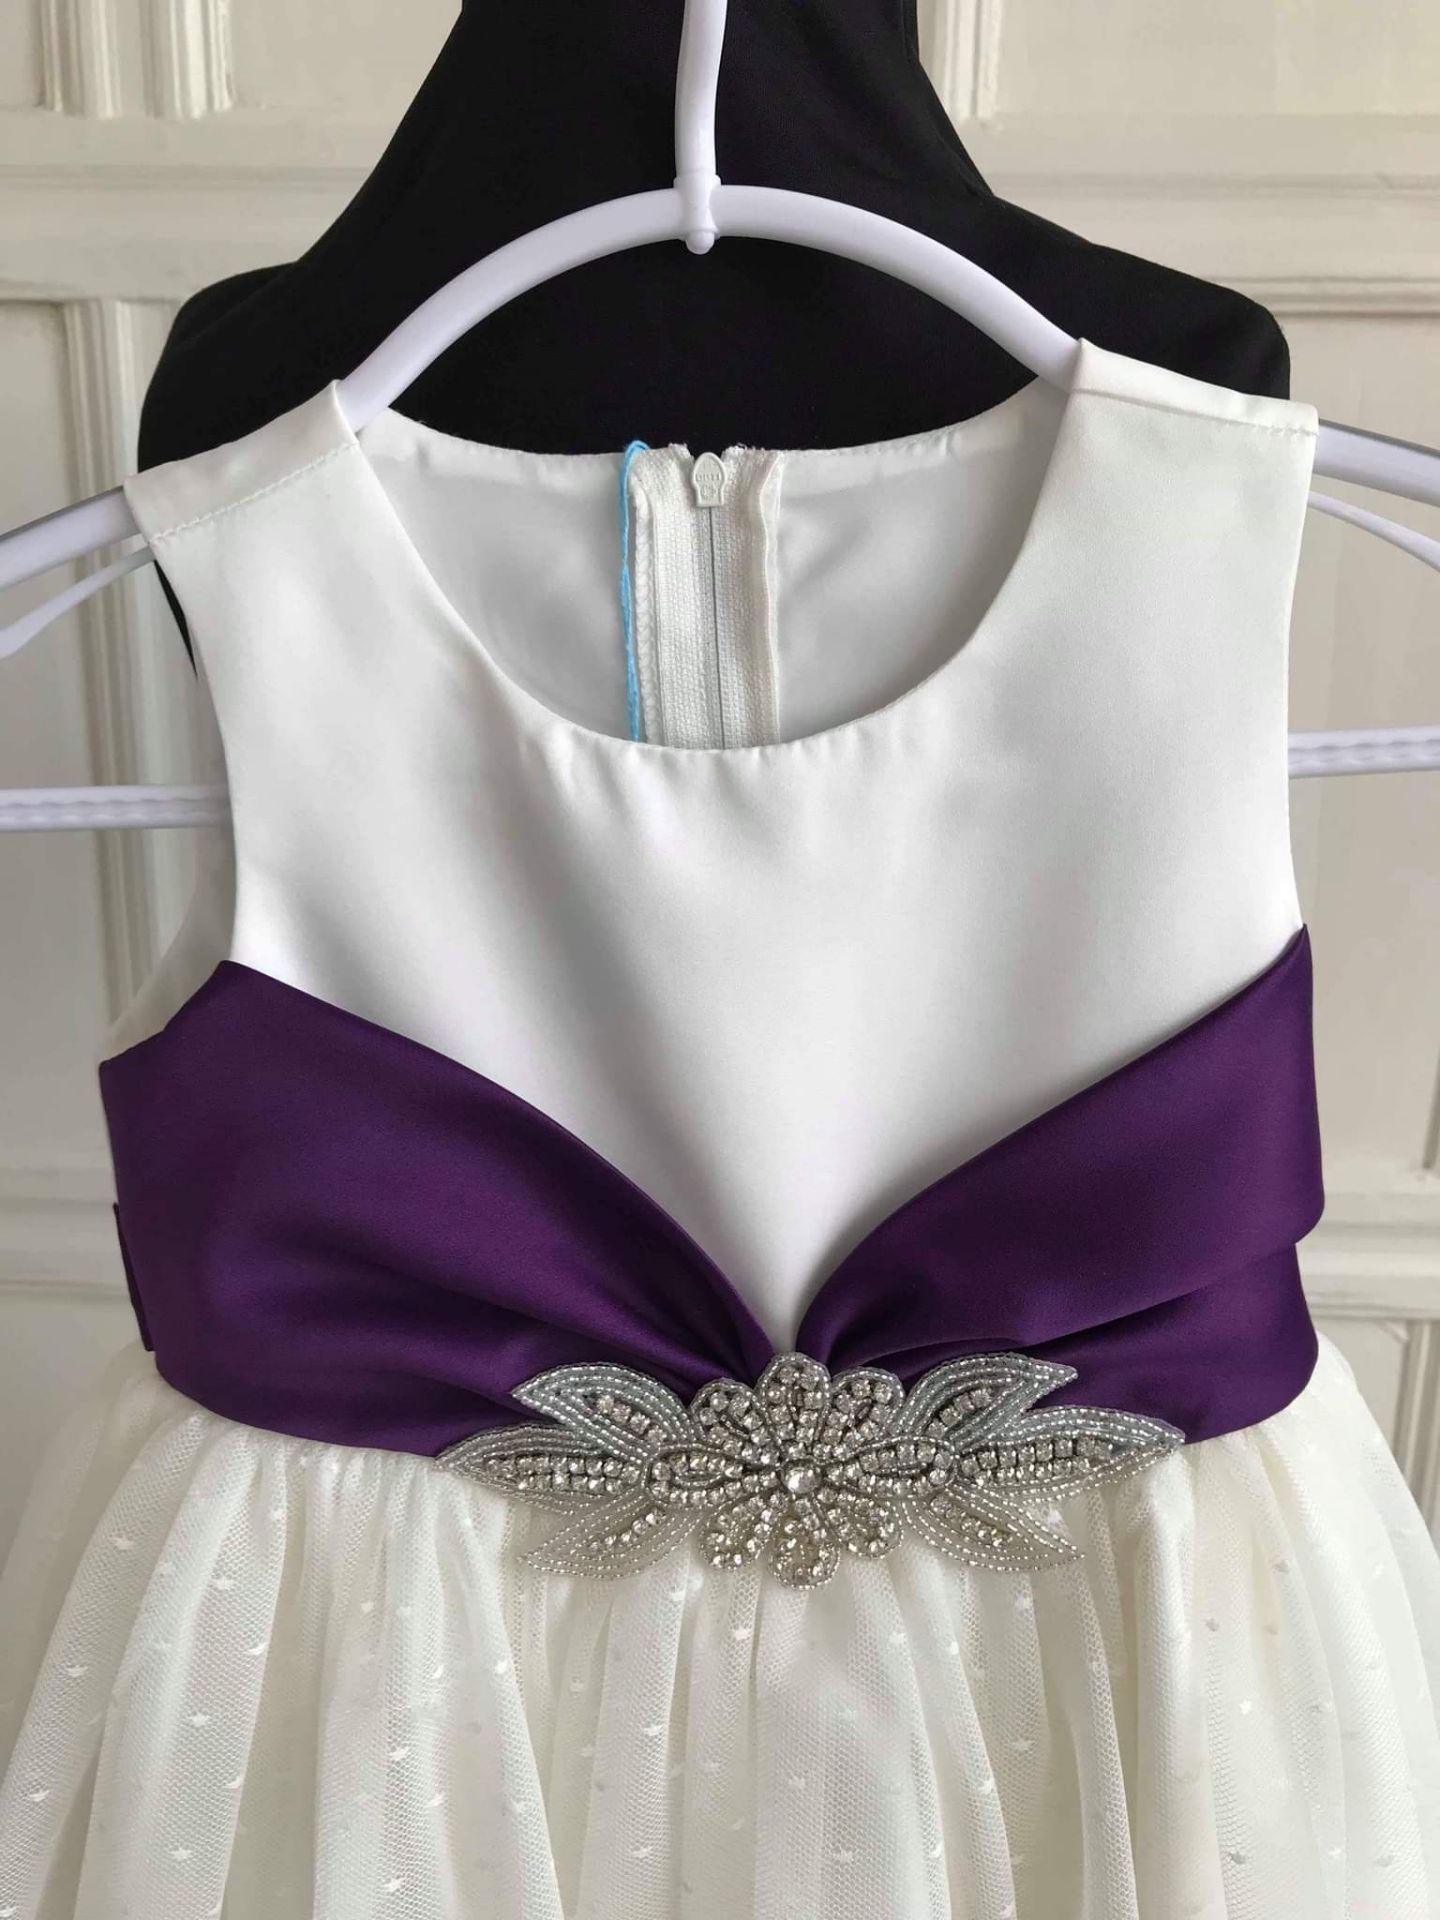 Flowergirl Dress In Age 3 To 4 With Purple Belt - Image 2 of 6